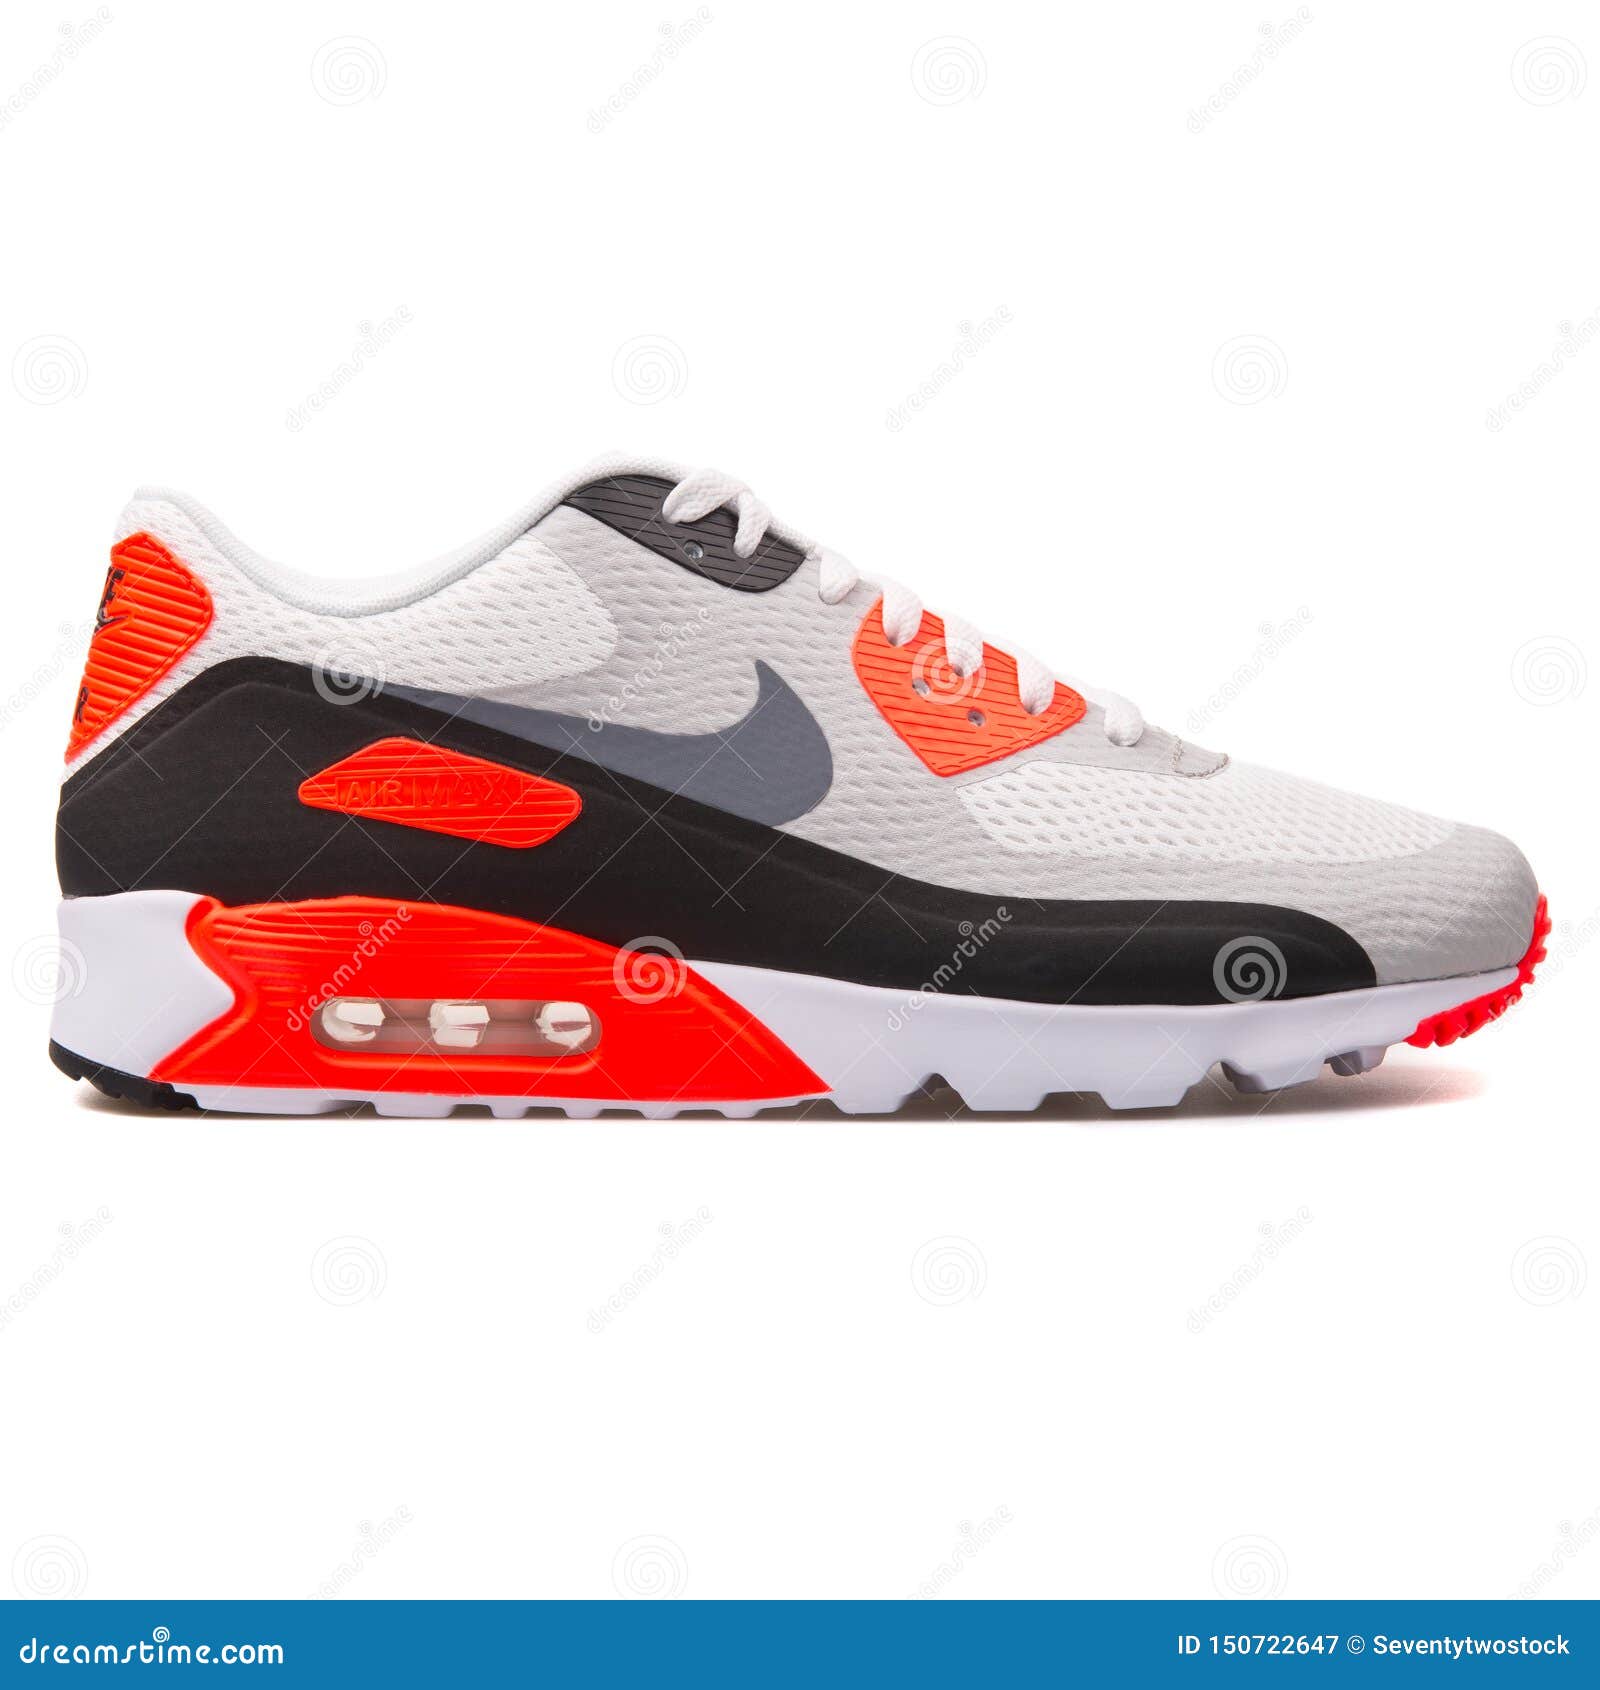 Nike Air 90 White, Grey, Red and Black Sneaker Photography - Image casual, lifestyle: 150722647